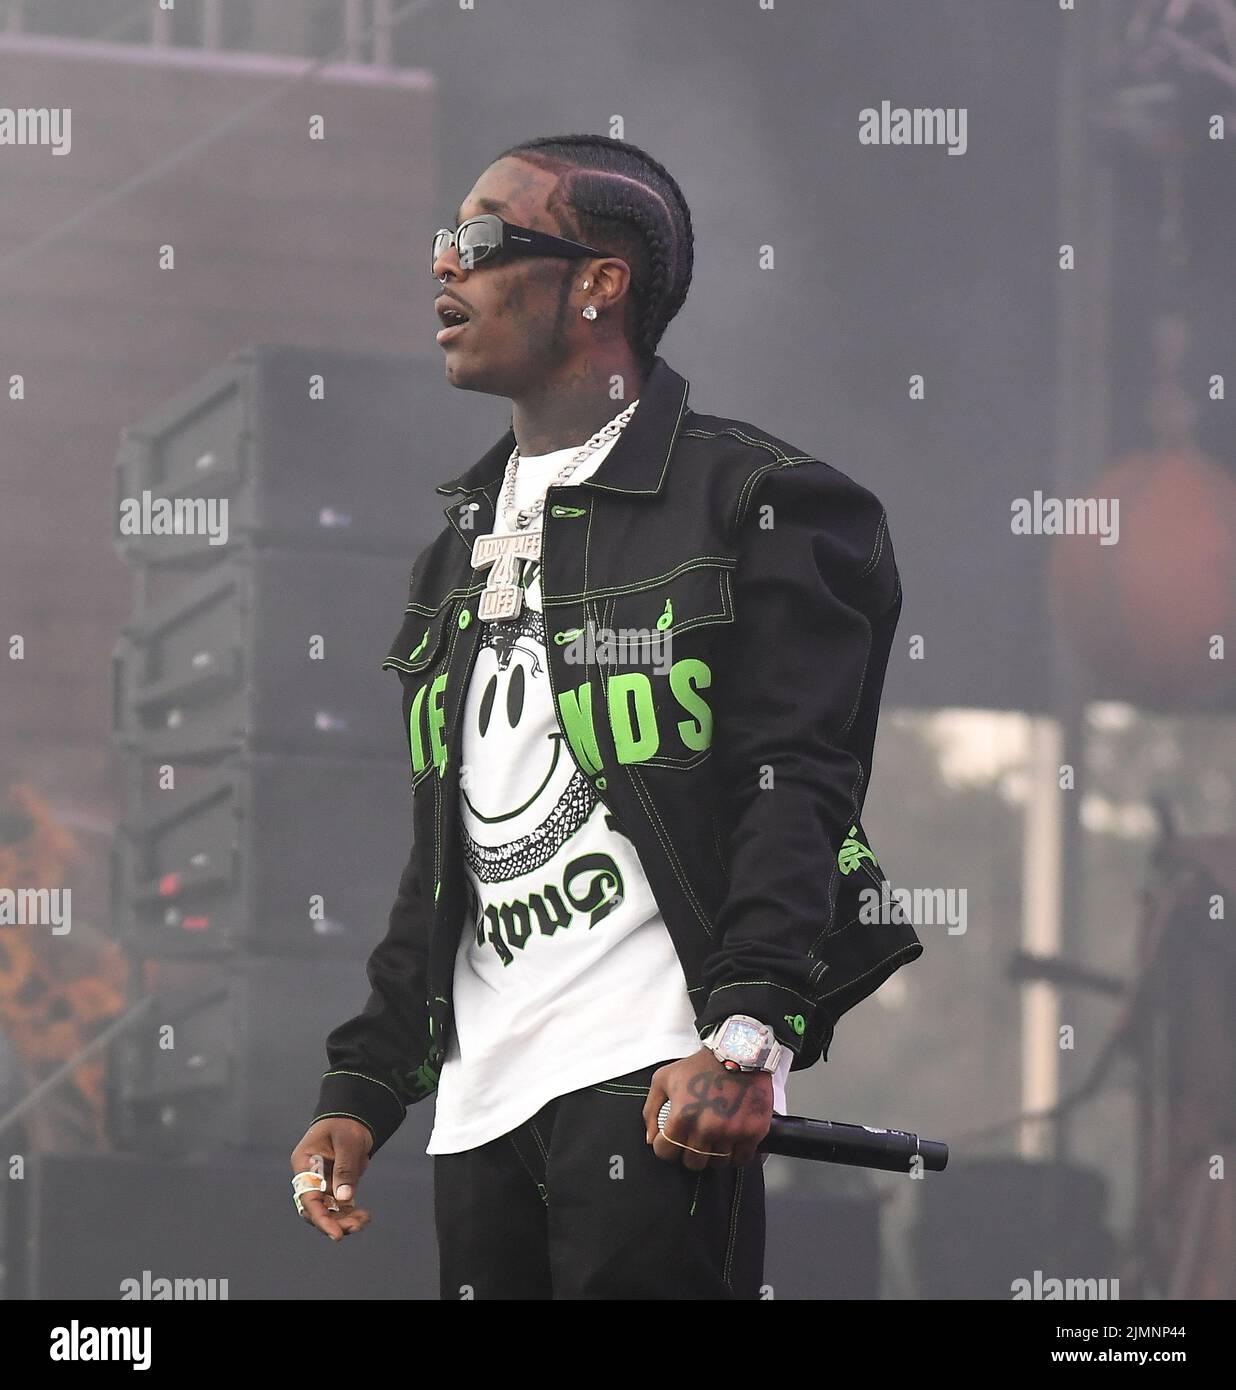 Lil Uzi Vert performs during the 2022 Outside Lands Music and Arts Festival at Golden Gate Park on August 05, 2022 in San Francisco, California. Photo: Casey Flanigan/imageSPACE/MediaPunch Stock Photo